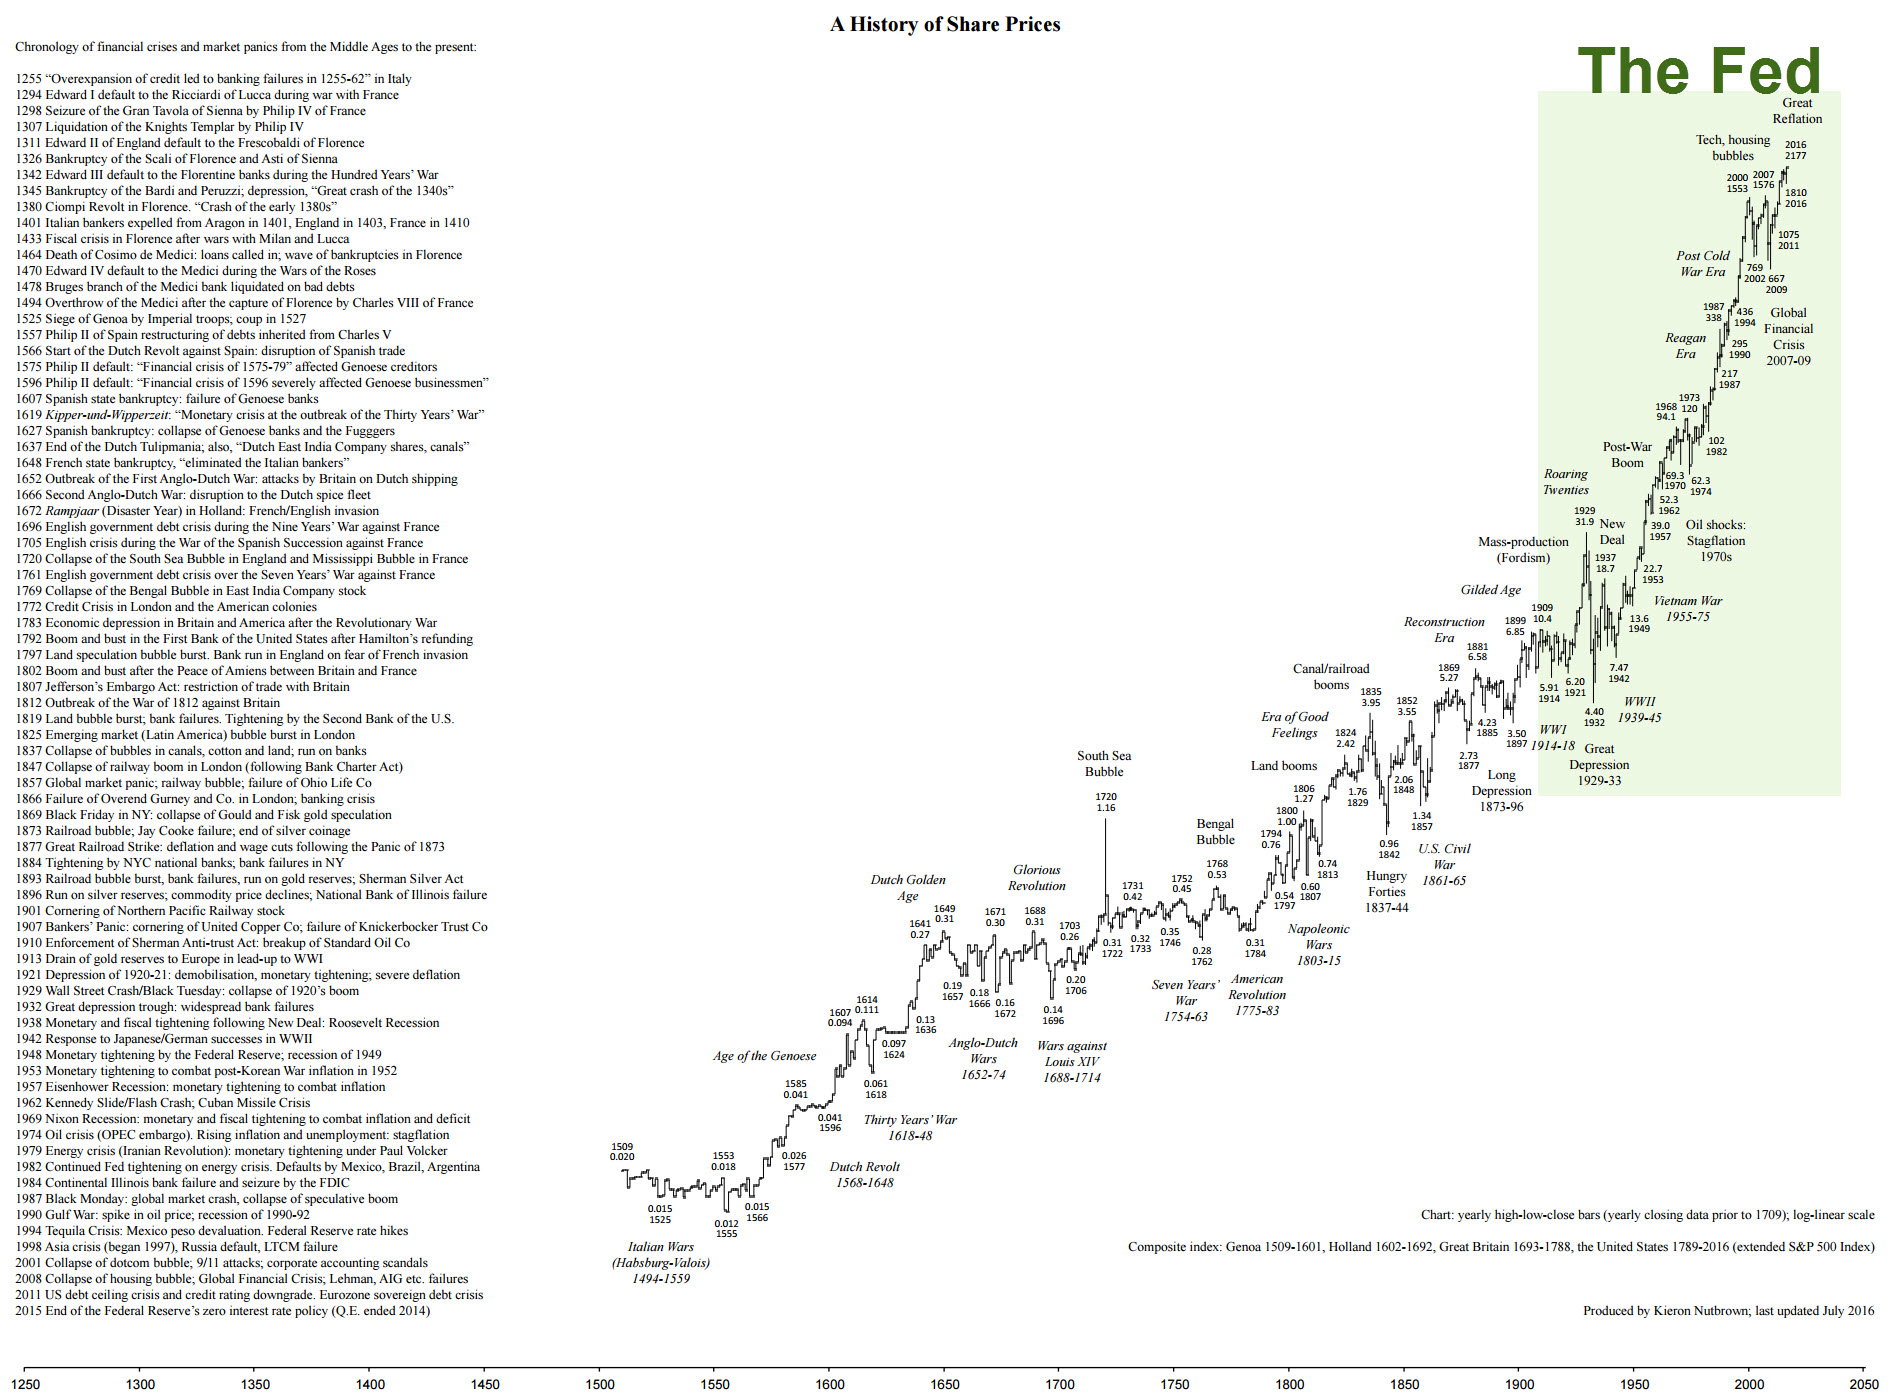 500 Years of Stock Markets